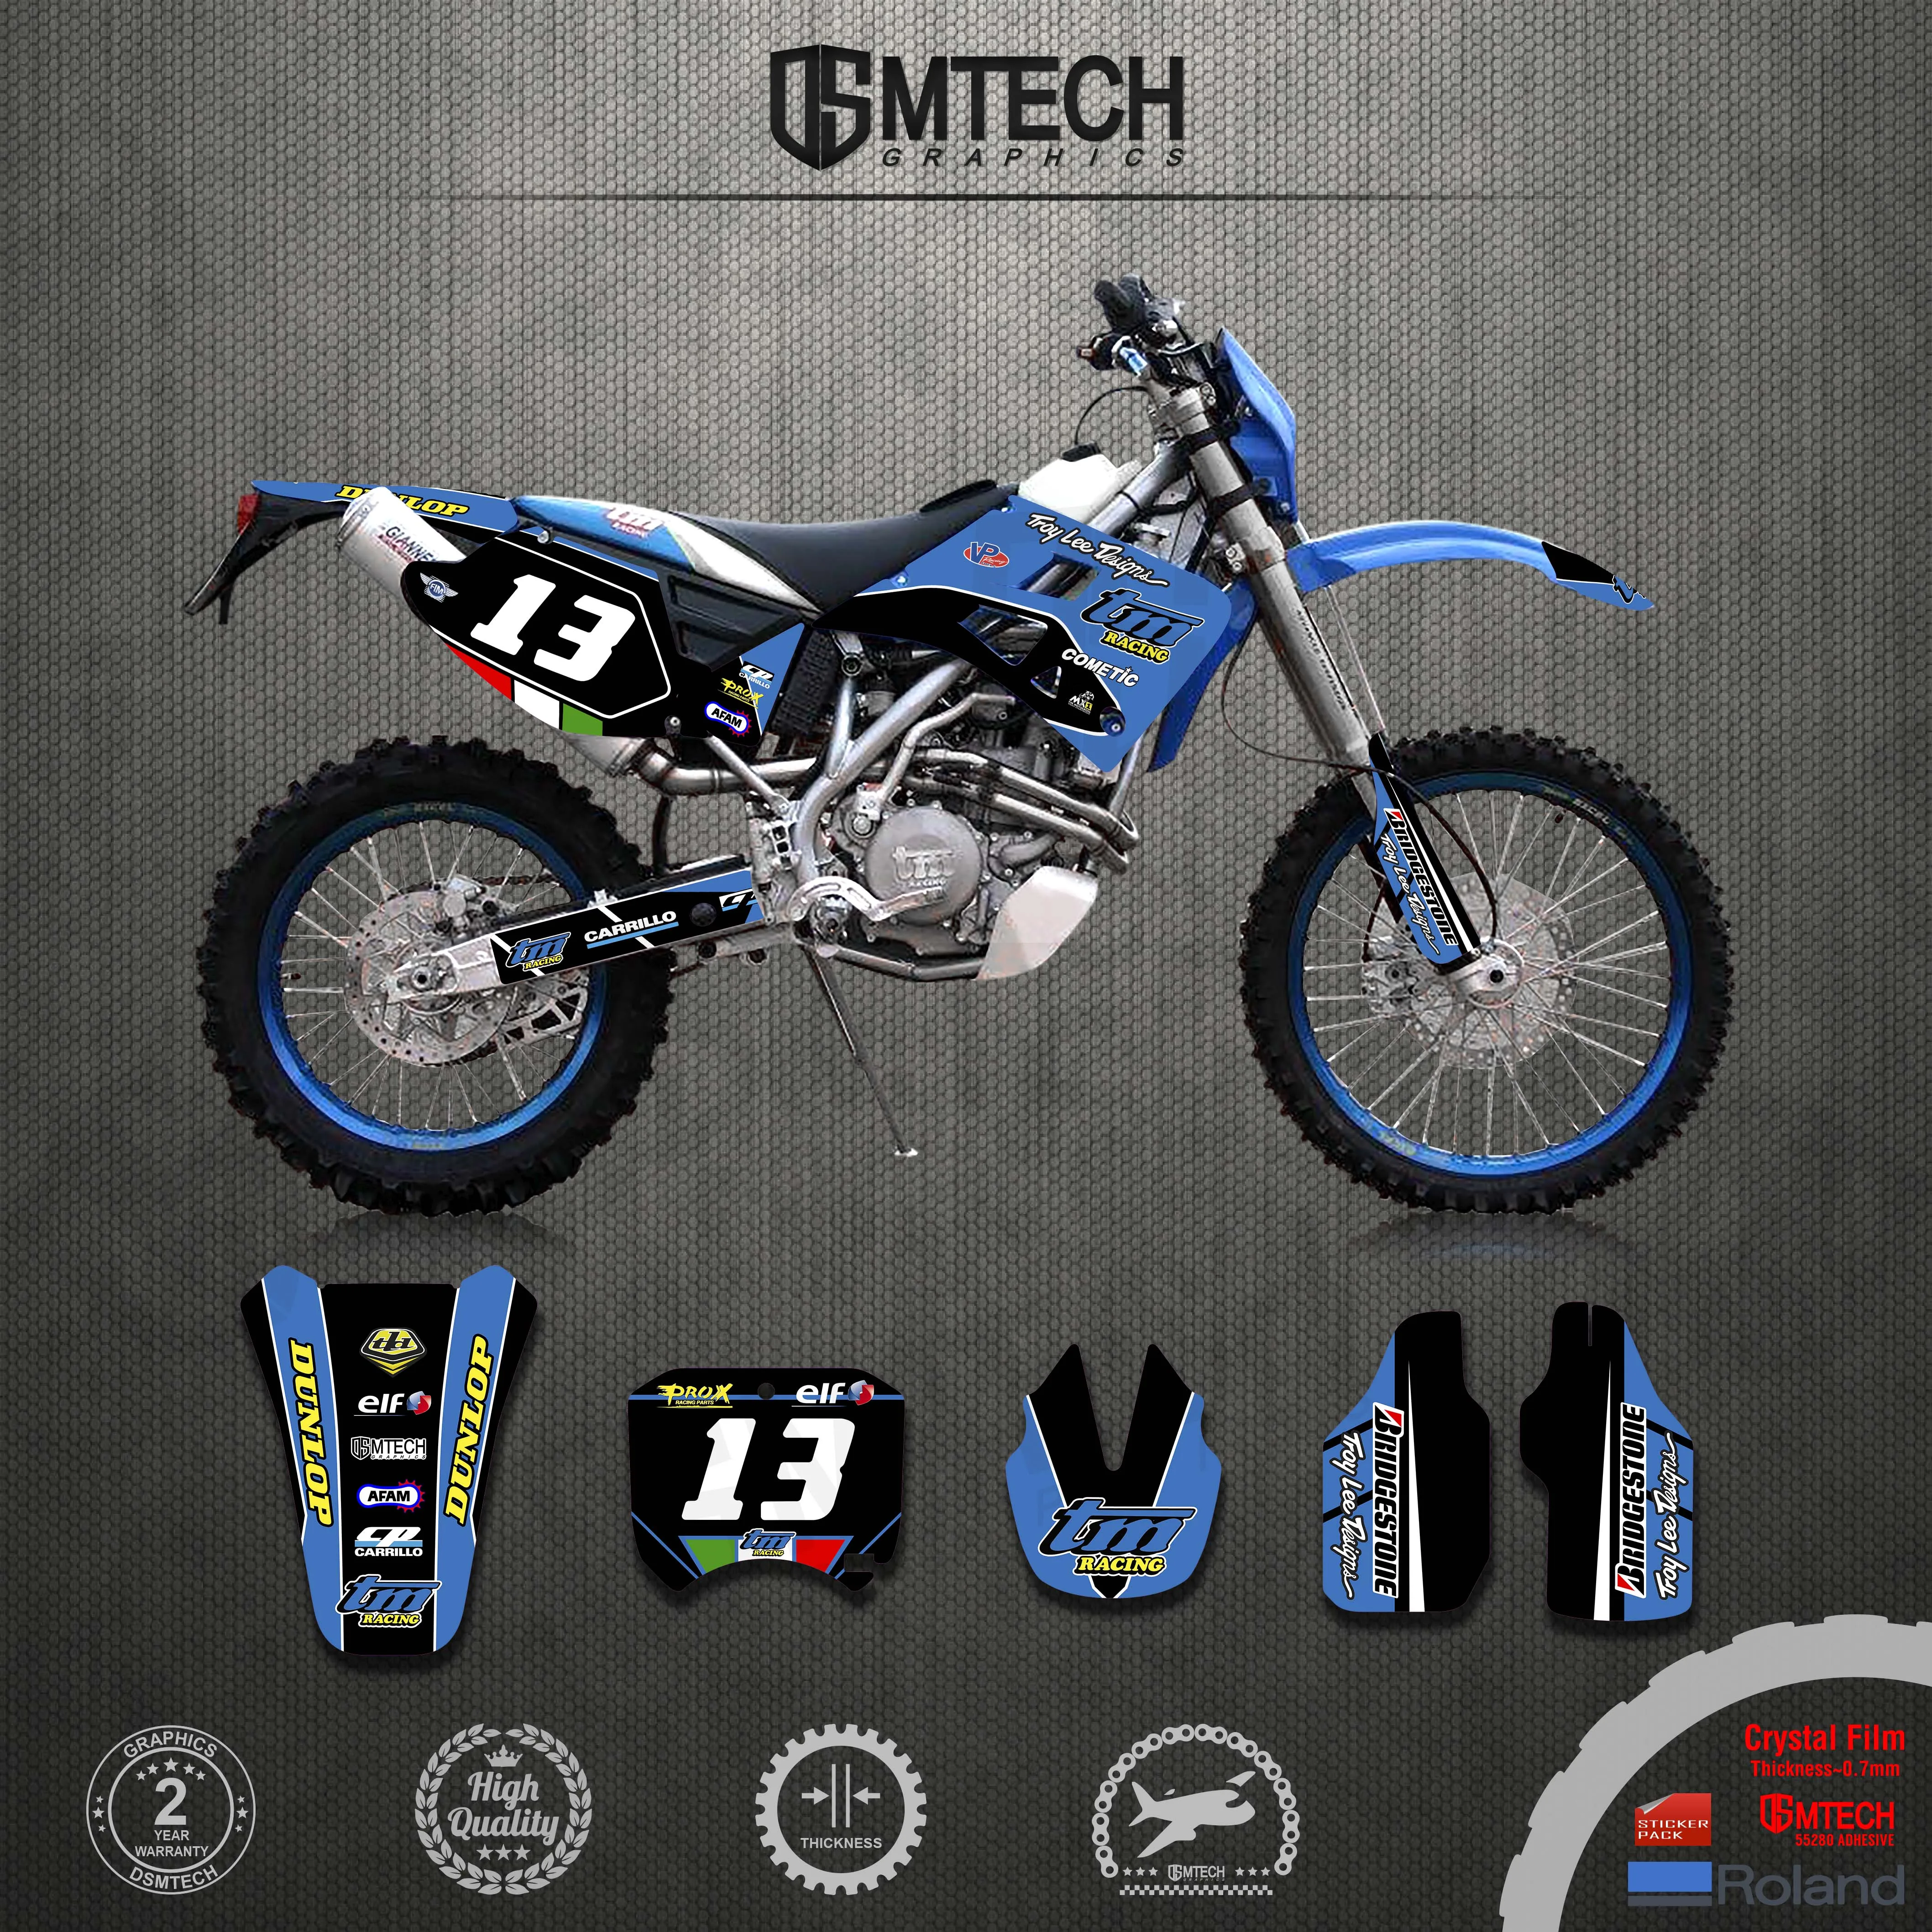 DSMTECH Motorcycle Decal Sticker Background Graphics Combination for TM 2000 2001 2002 2003  TM 2000-2003